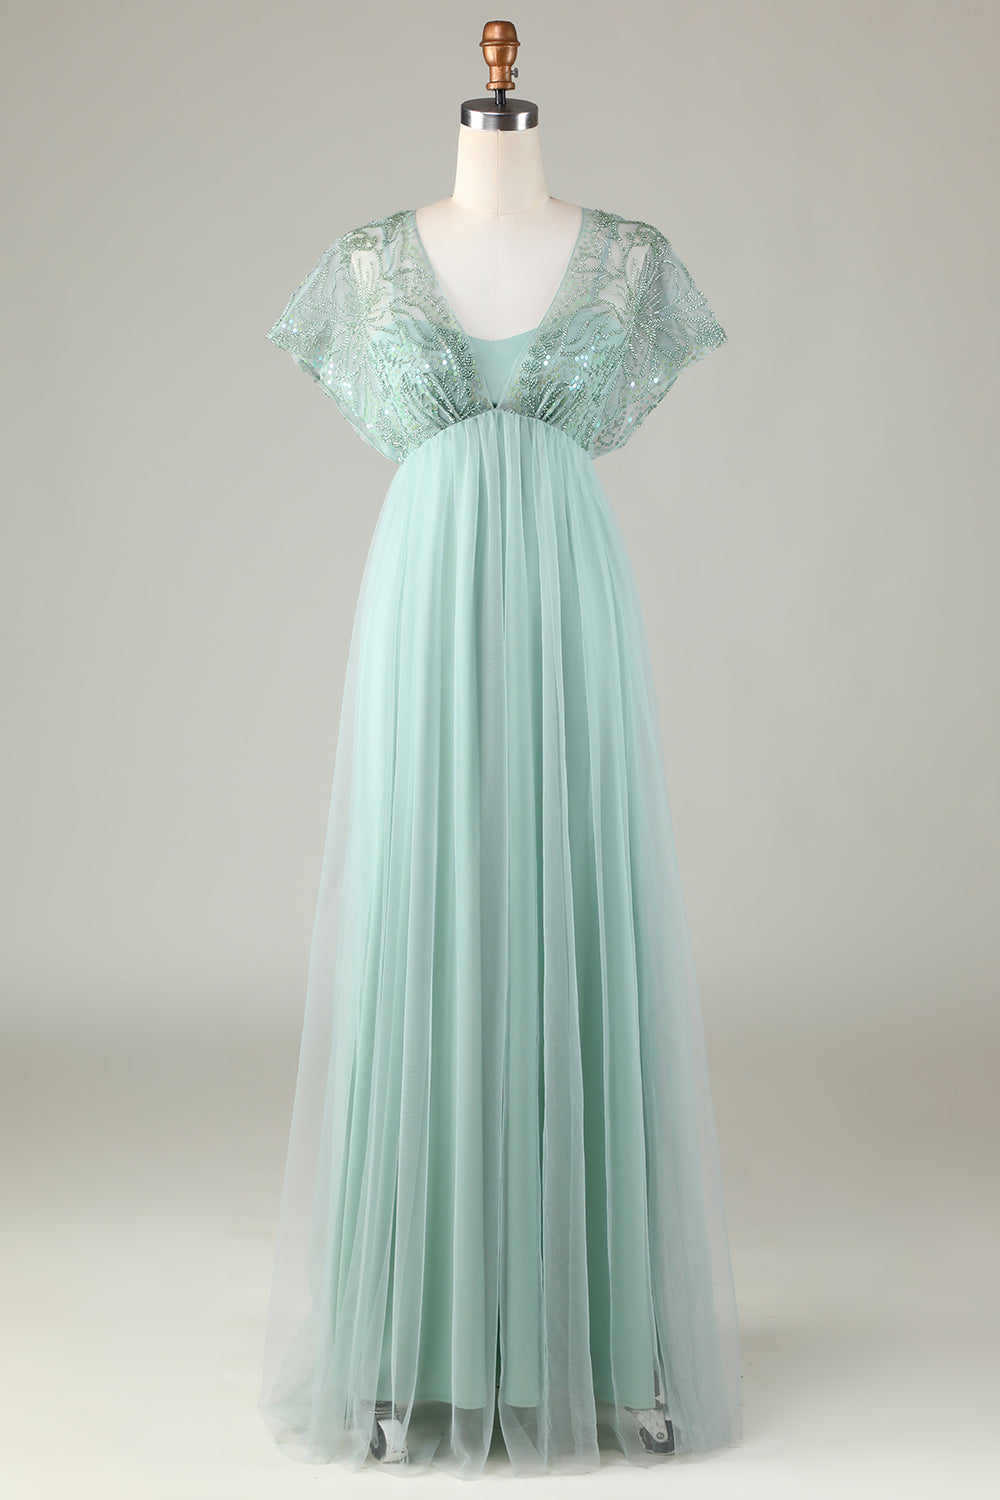 Tulle Sparkly Sage Bridesmaid Dress with Beading